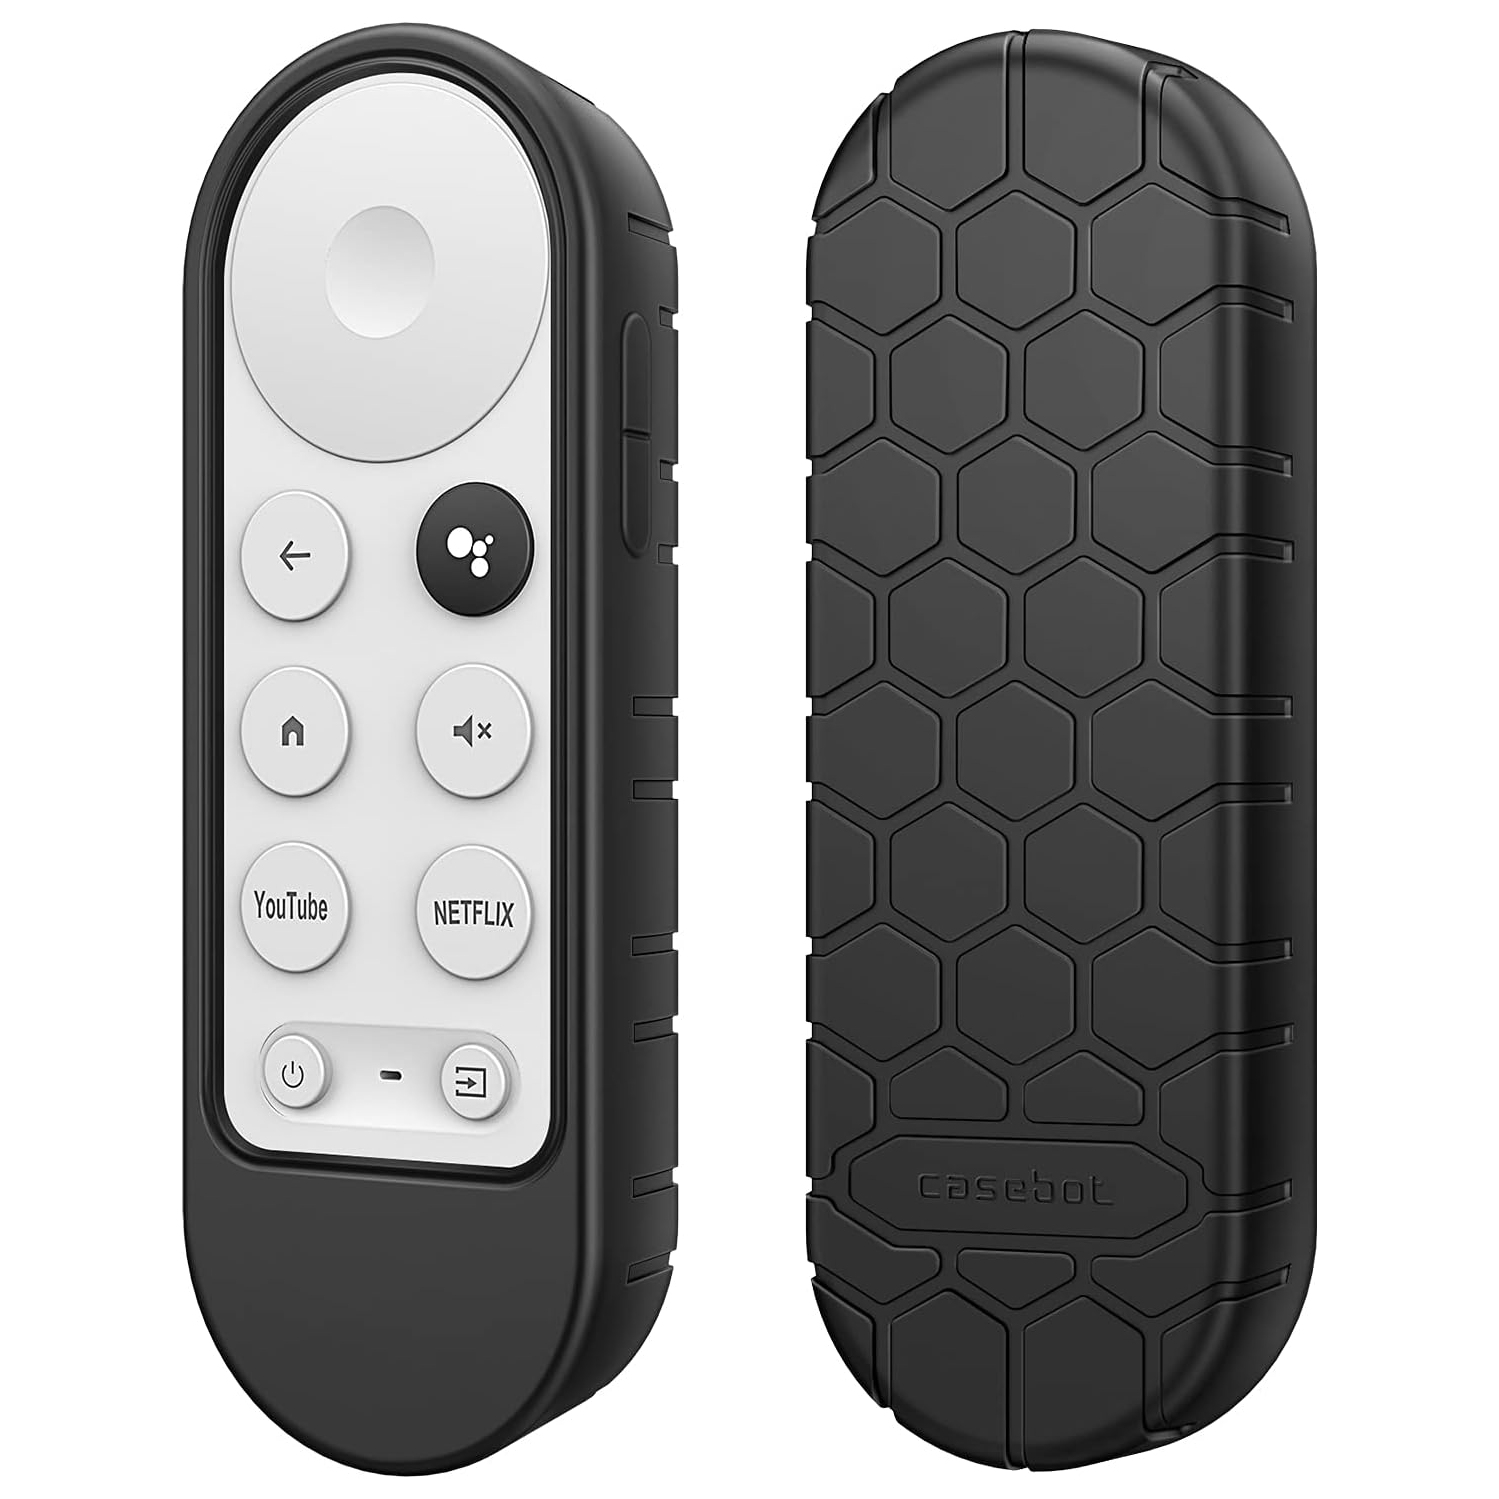 Protective Case for Chromecast with Google TV 2020 Voice Remote - CaseBot Lightweight (Anti-Slip) Shockproof